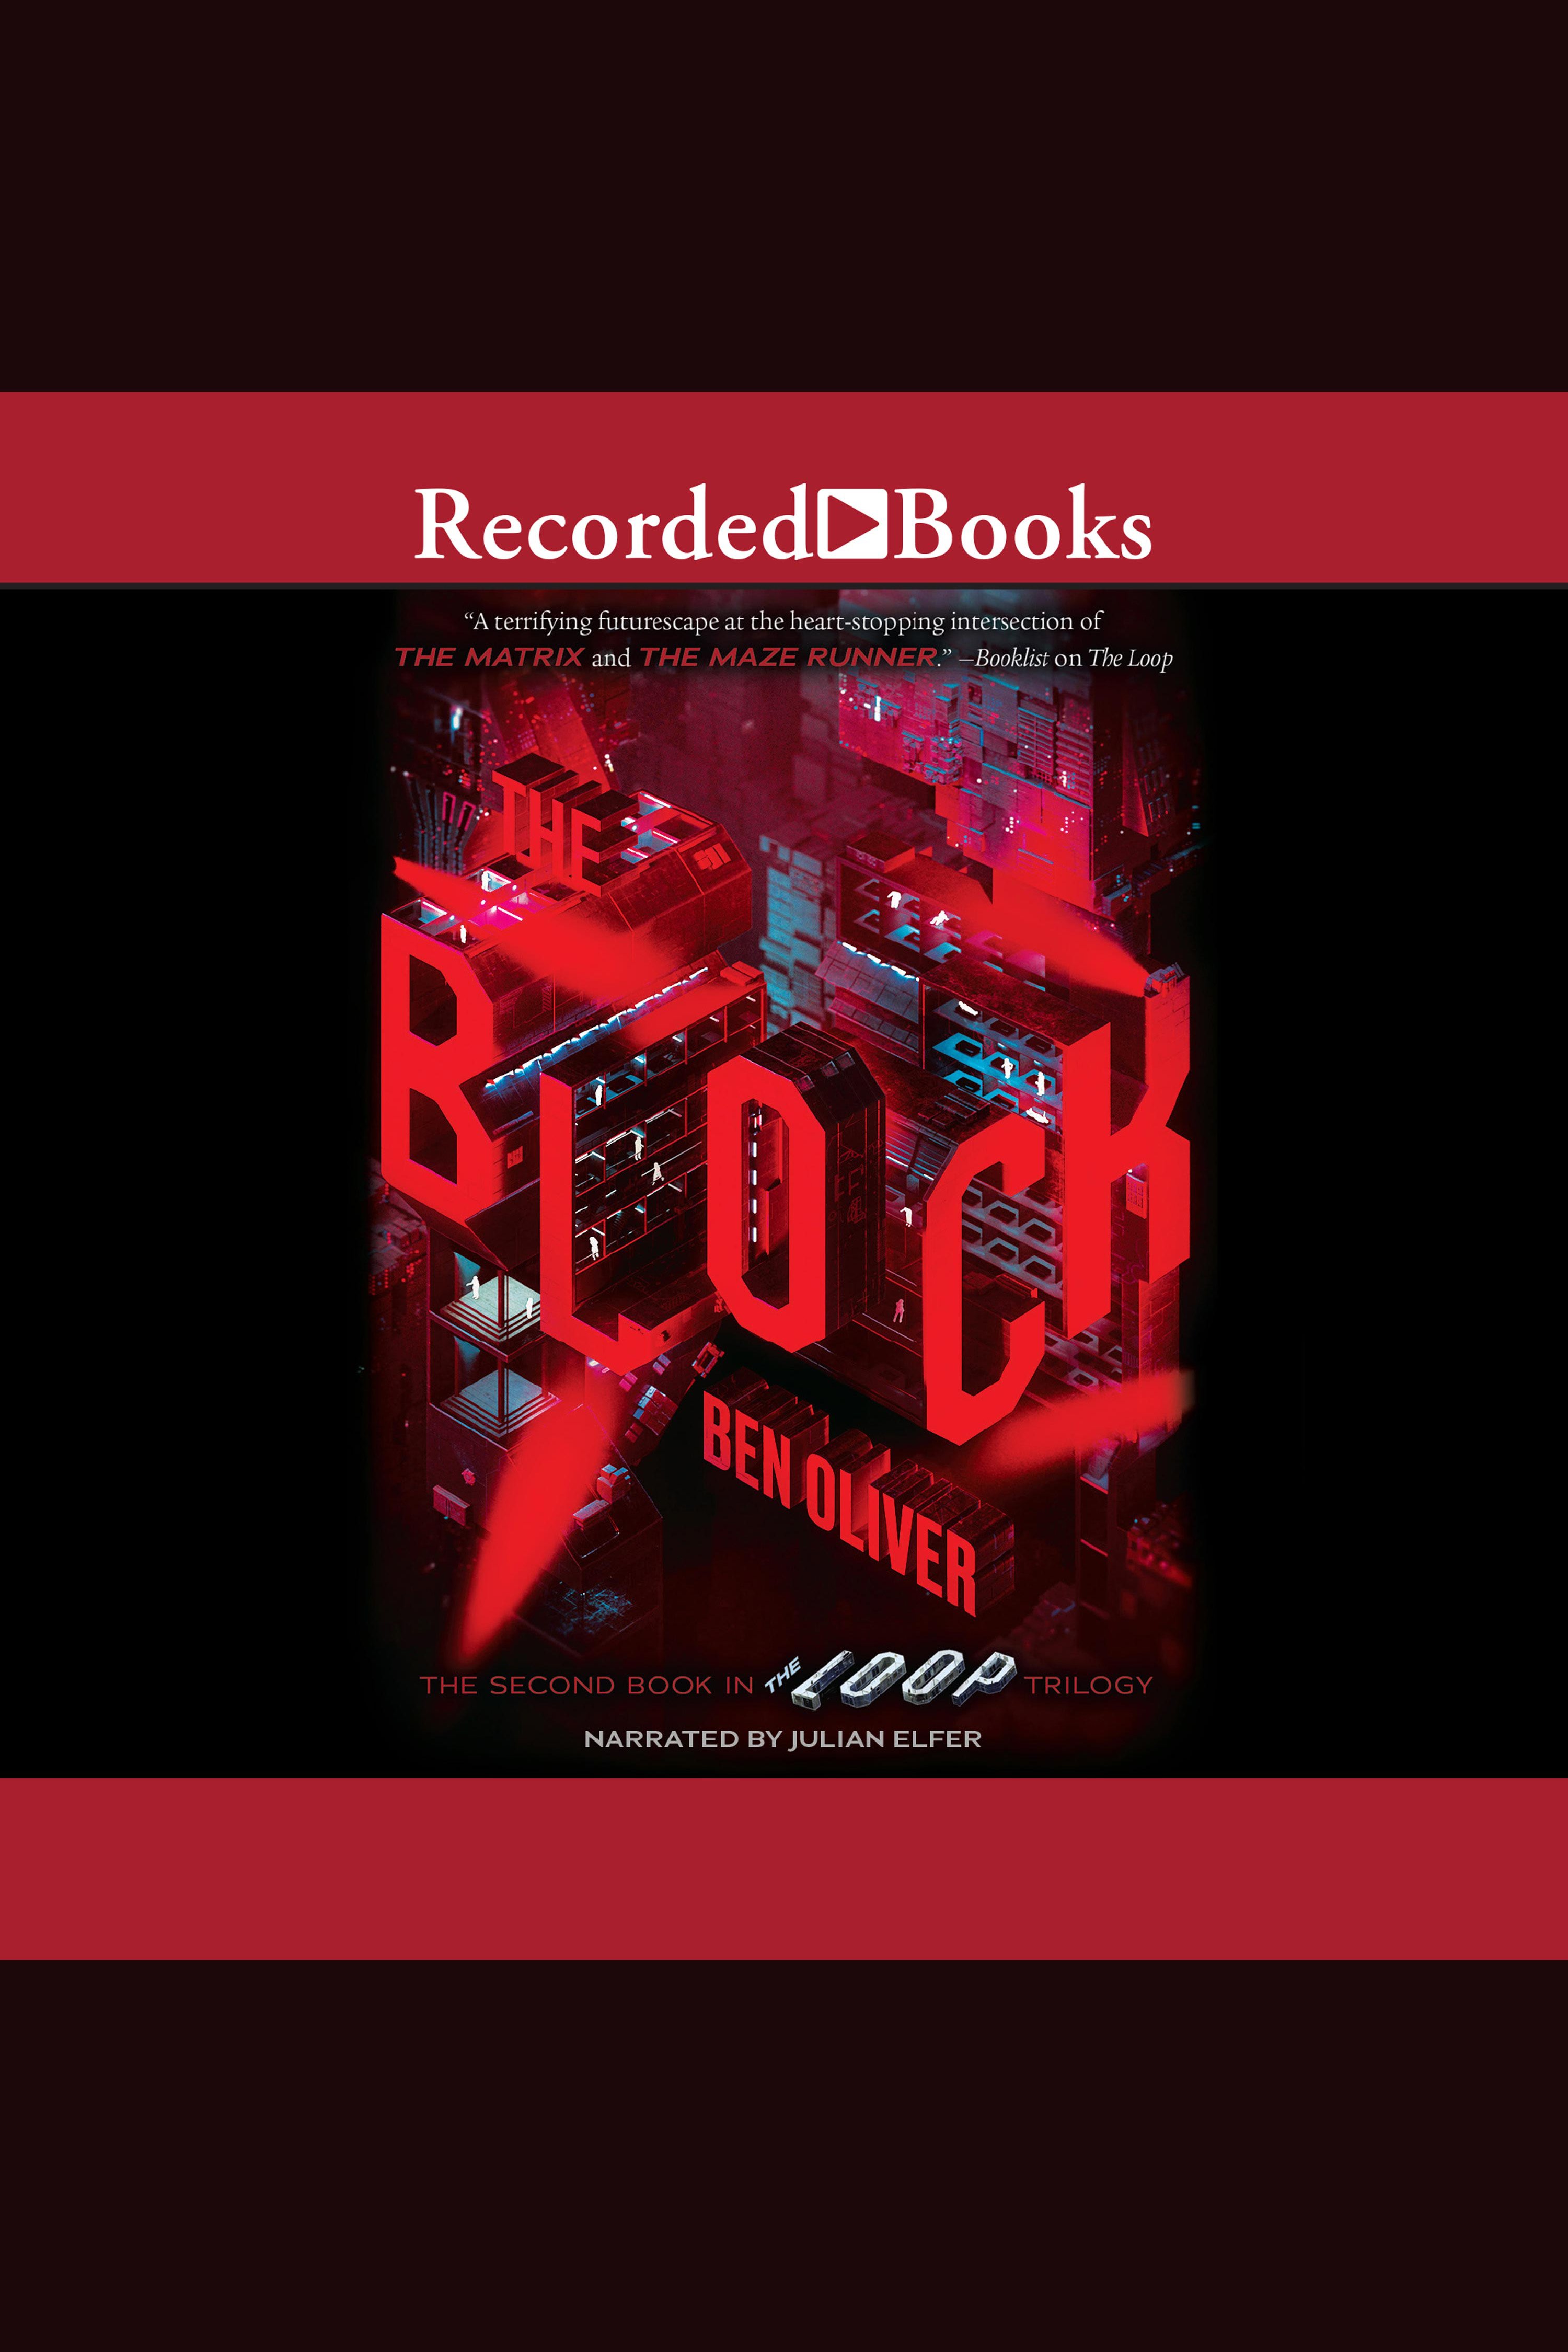 The Block cover image